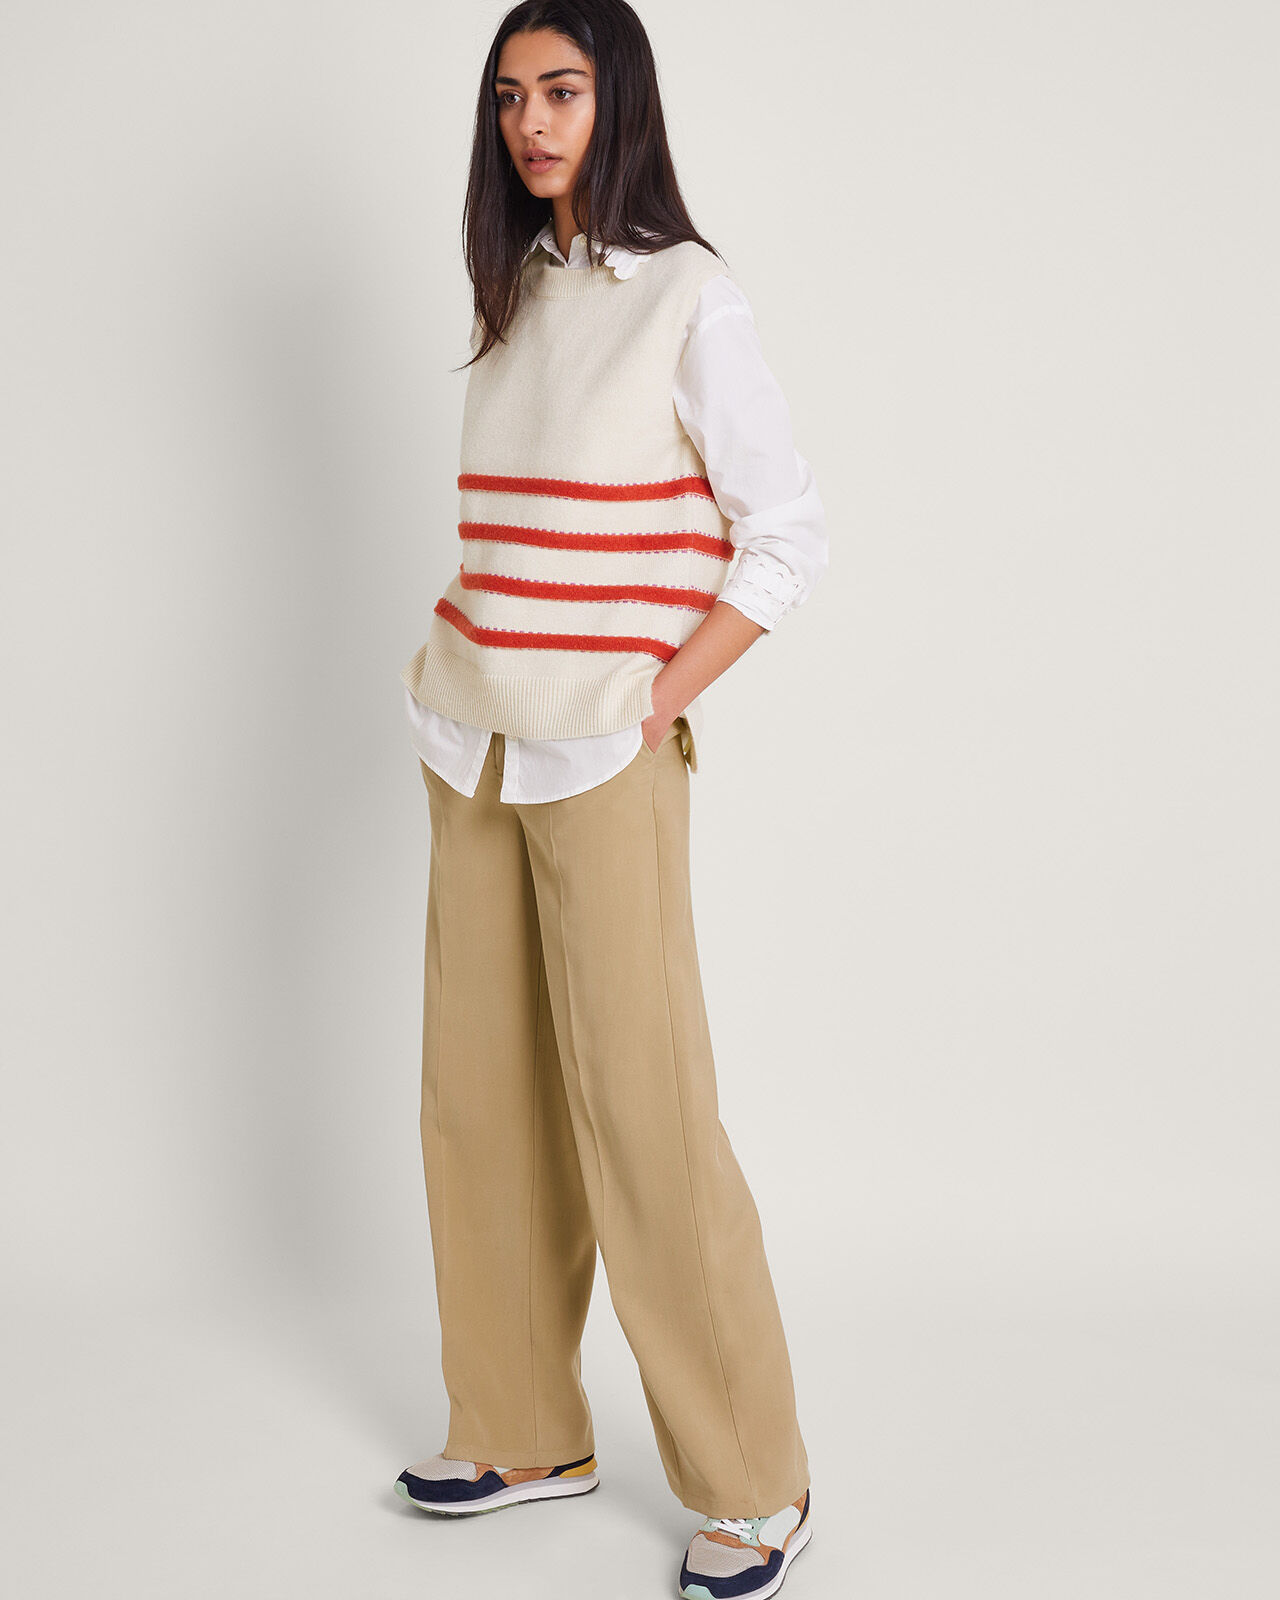 MARNI: pants for woman - Camel | Marni pants PAMA0482SUTW839 online at  GIGLIO.COM